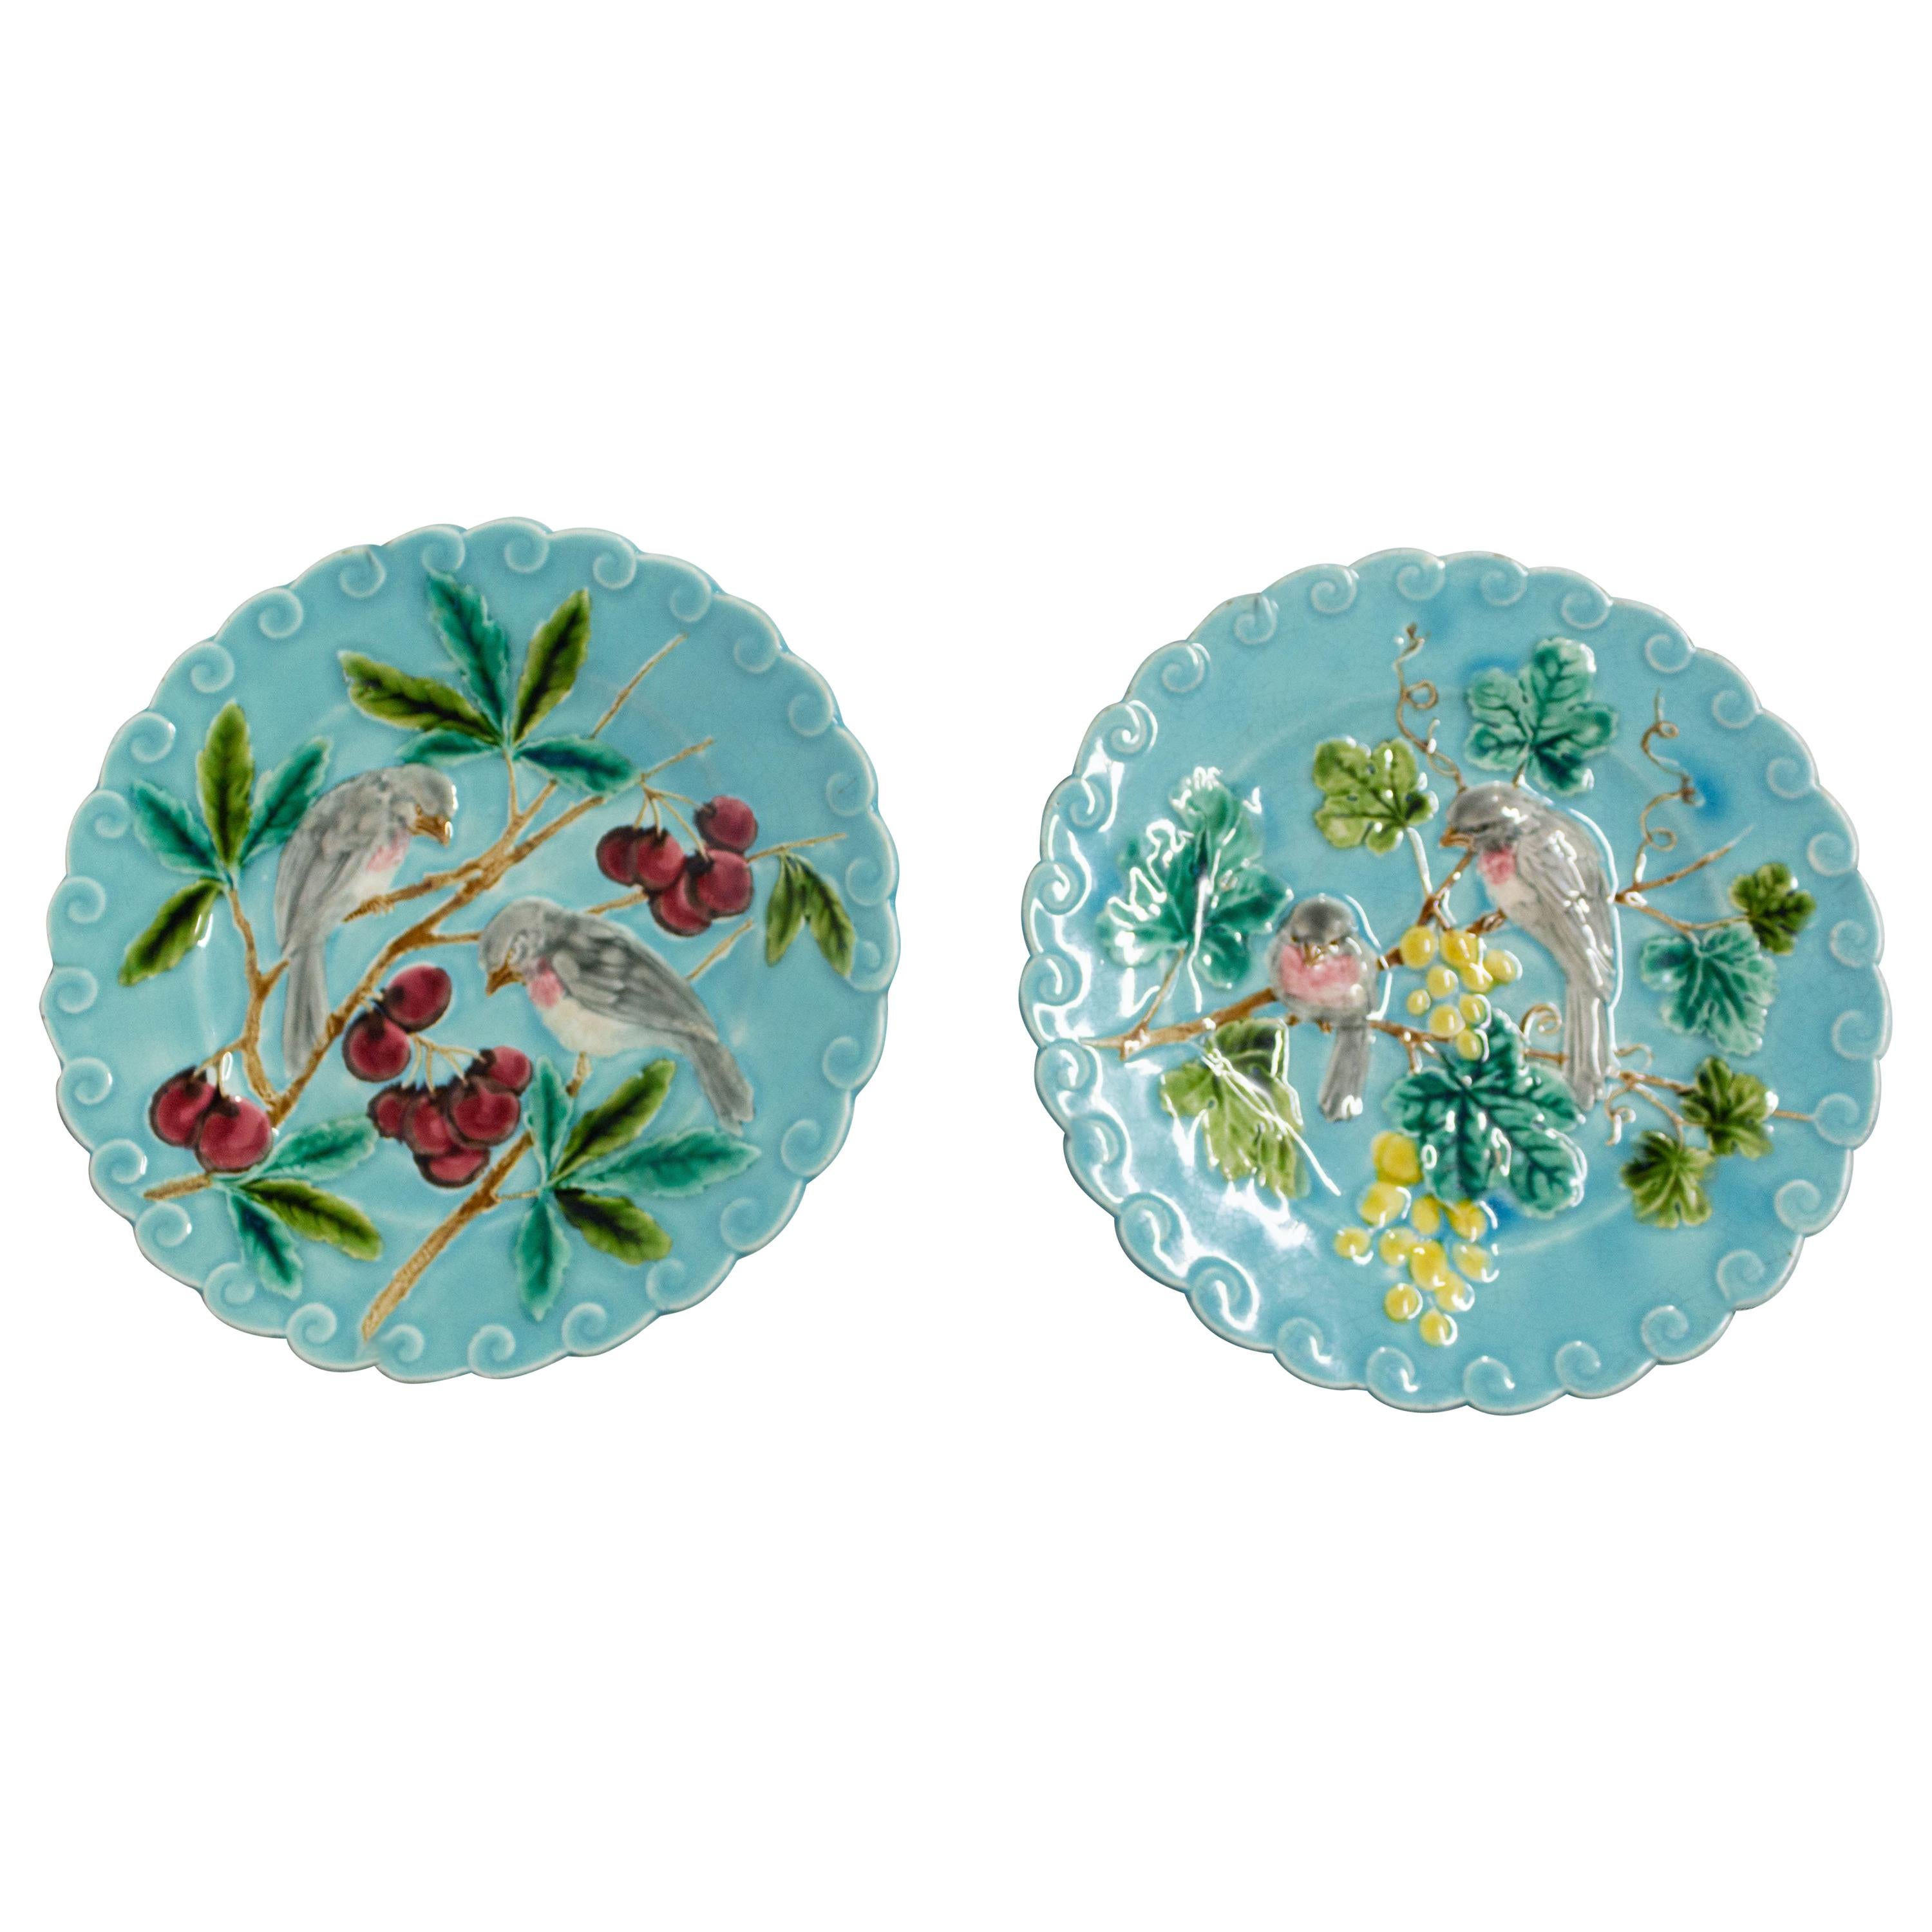 Pair of Sarreguemines Barbotine Enameled Plates Birds French, Late 19th Century